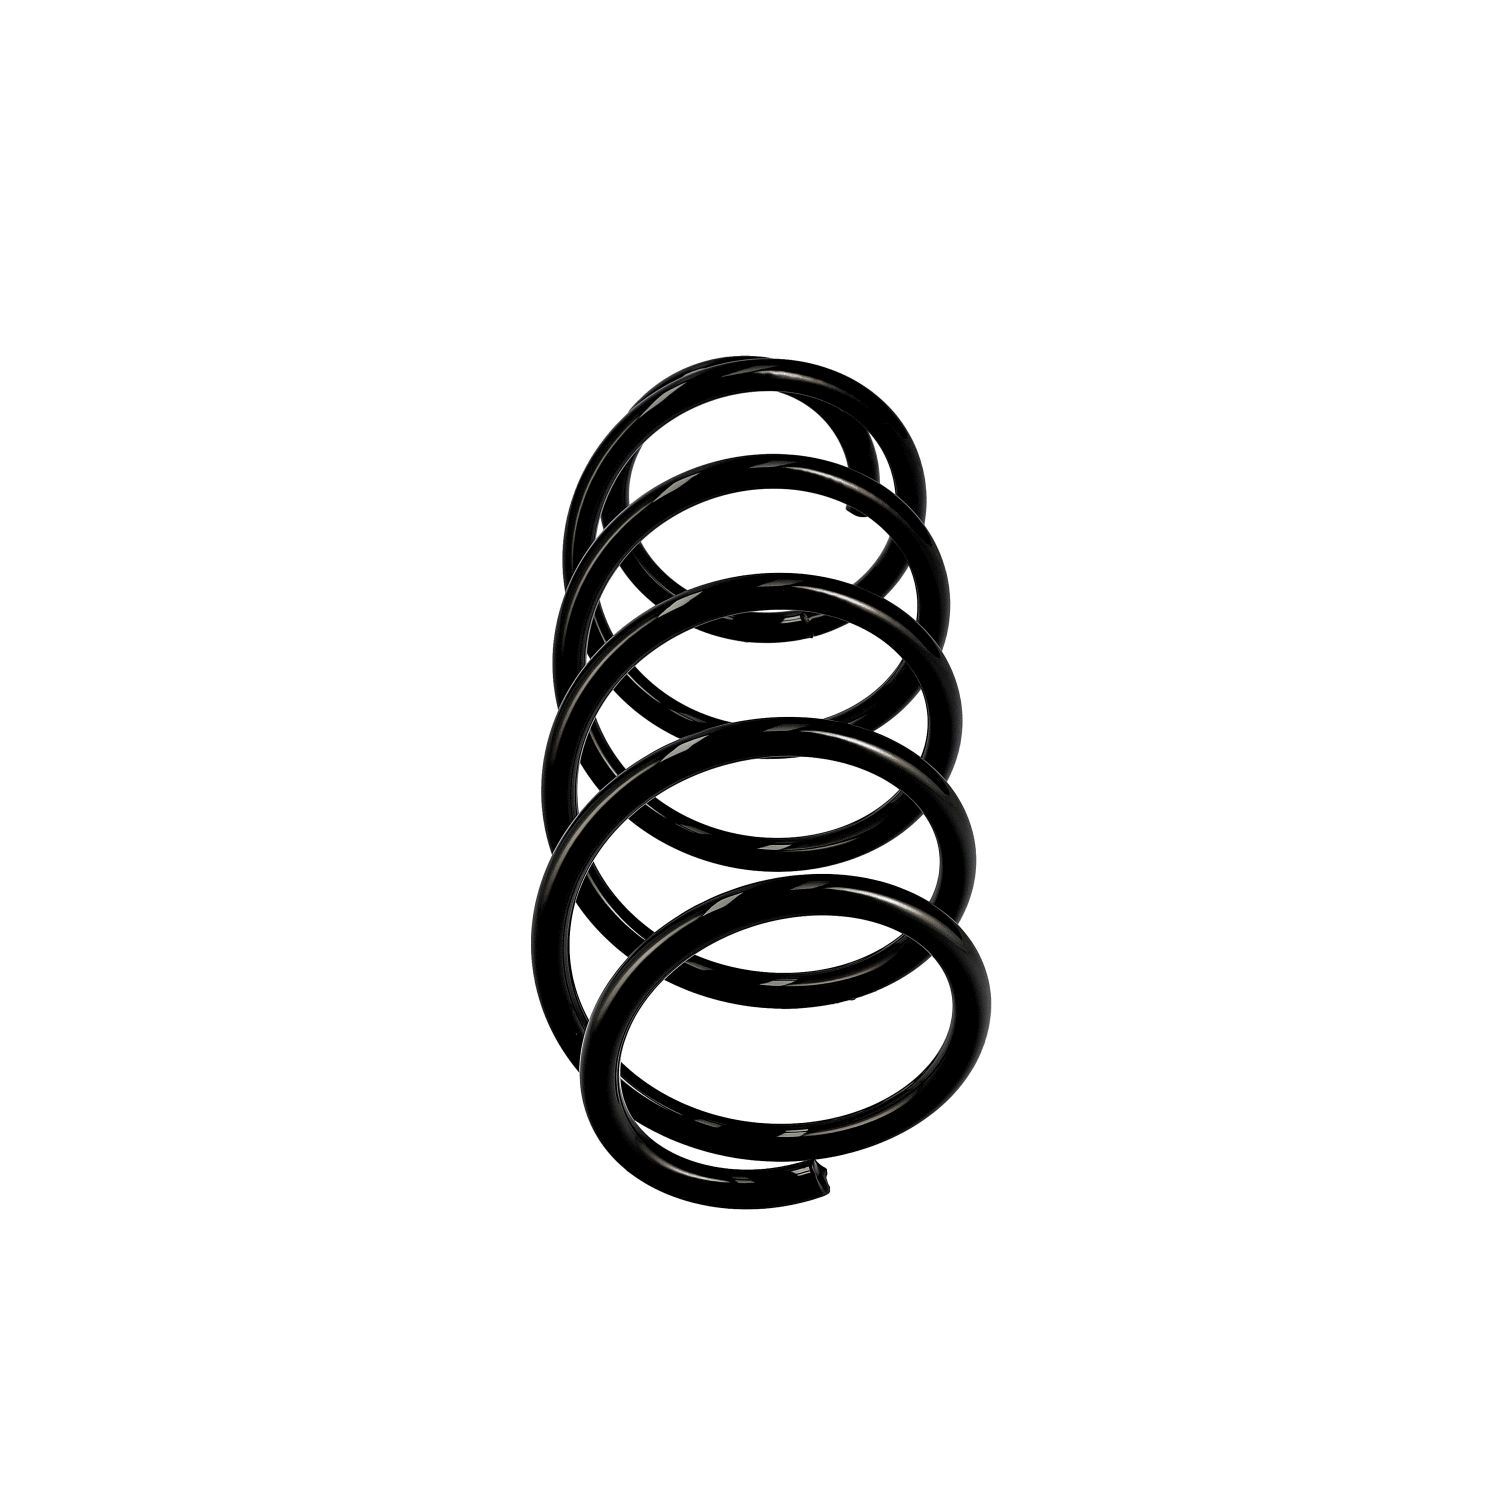 EIBACH Single Spring ERL (OE-Replacement) R10156 Coil spring 6Q0 411 105 BK